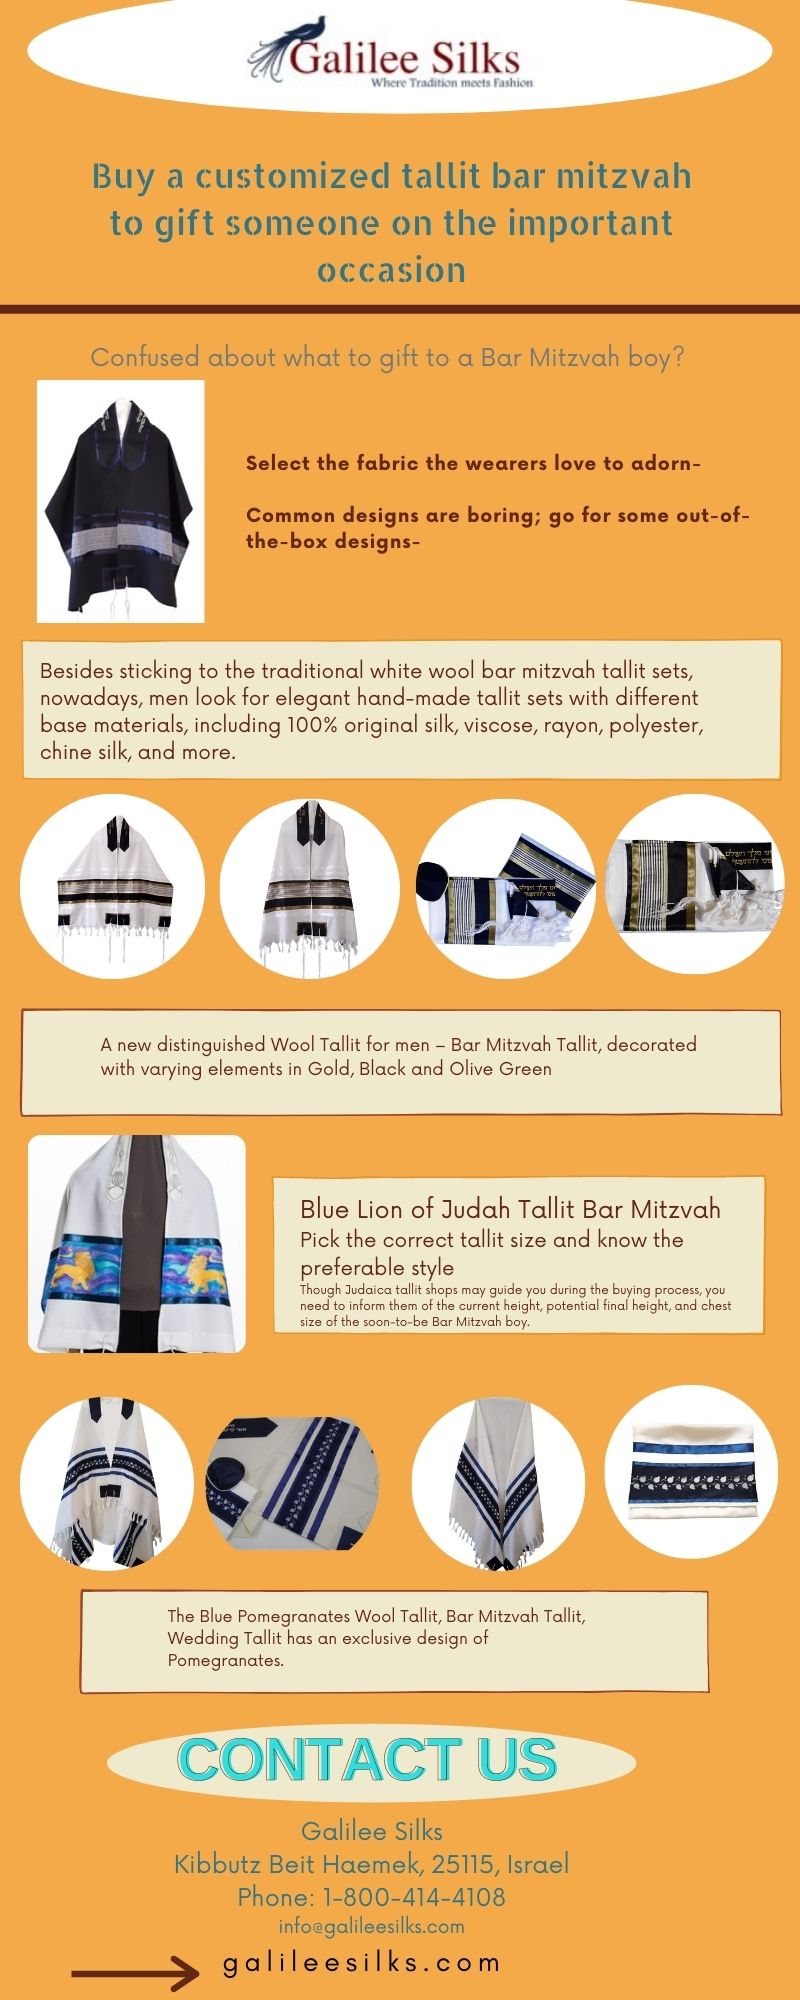 Buy a customized tallit bar mitzvah to gift someone on the important occasion Confused about what to gift to a Bar Mitzvah boy? Check out the exclusive collection of tallit bar Mitzvah at Galilee Silks online store. Place your customized order now. For more details, visit: https://www.galileesilks.com/collections/bar-mitzvah-tallit by amramrafi